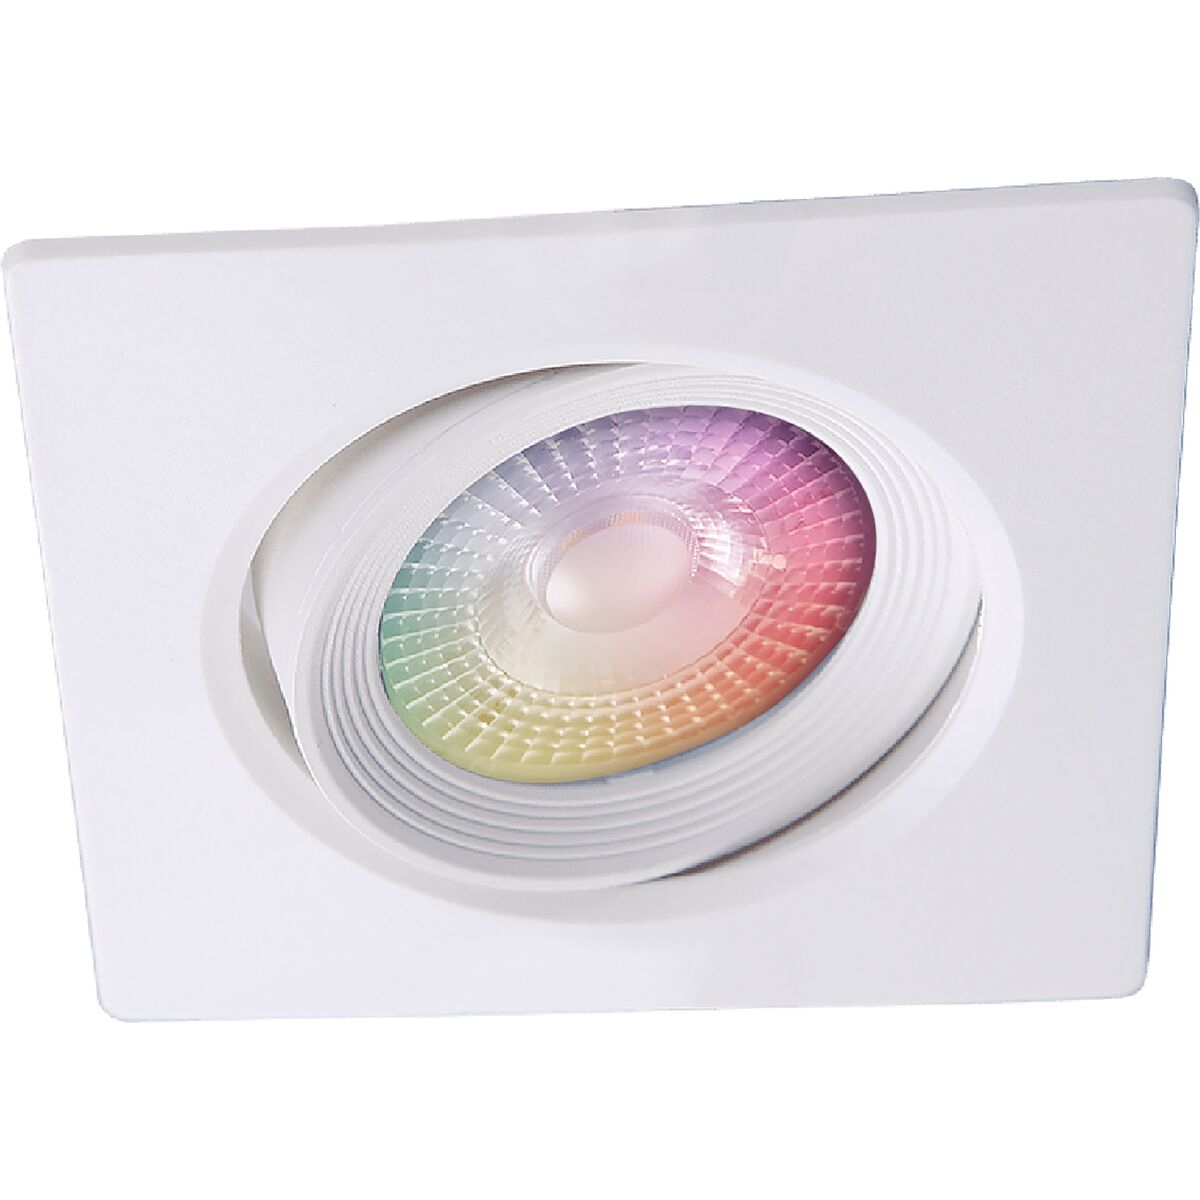 Tramontina Smart Led 350 lm 5 W with 16 Million Colors RGBW Square Inlay Spot